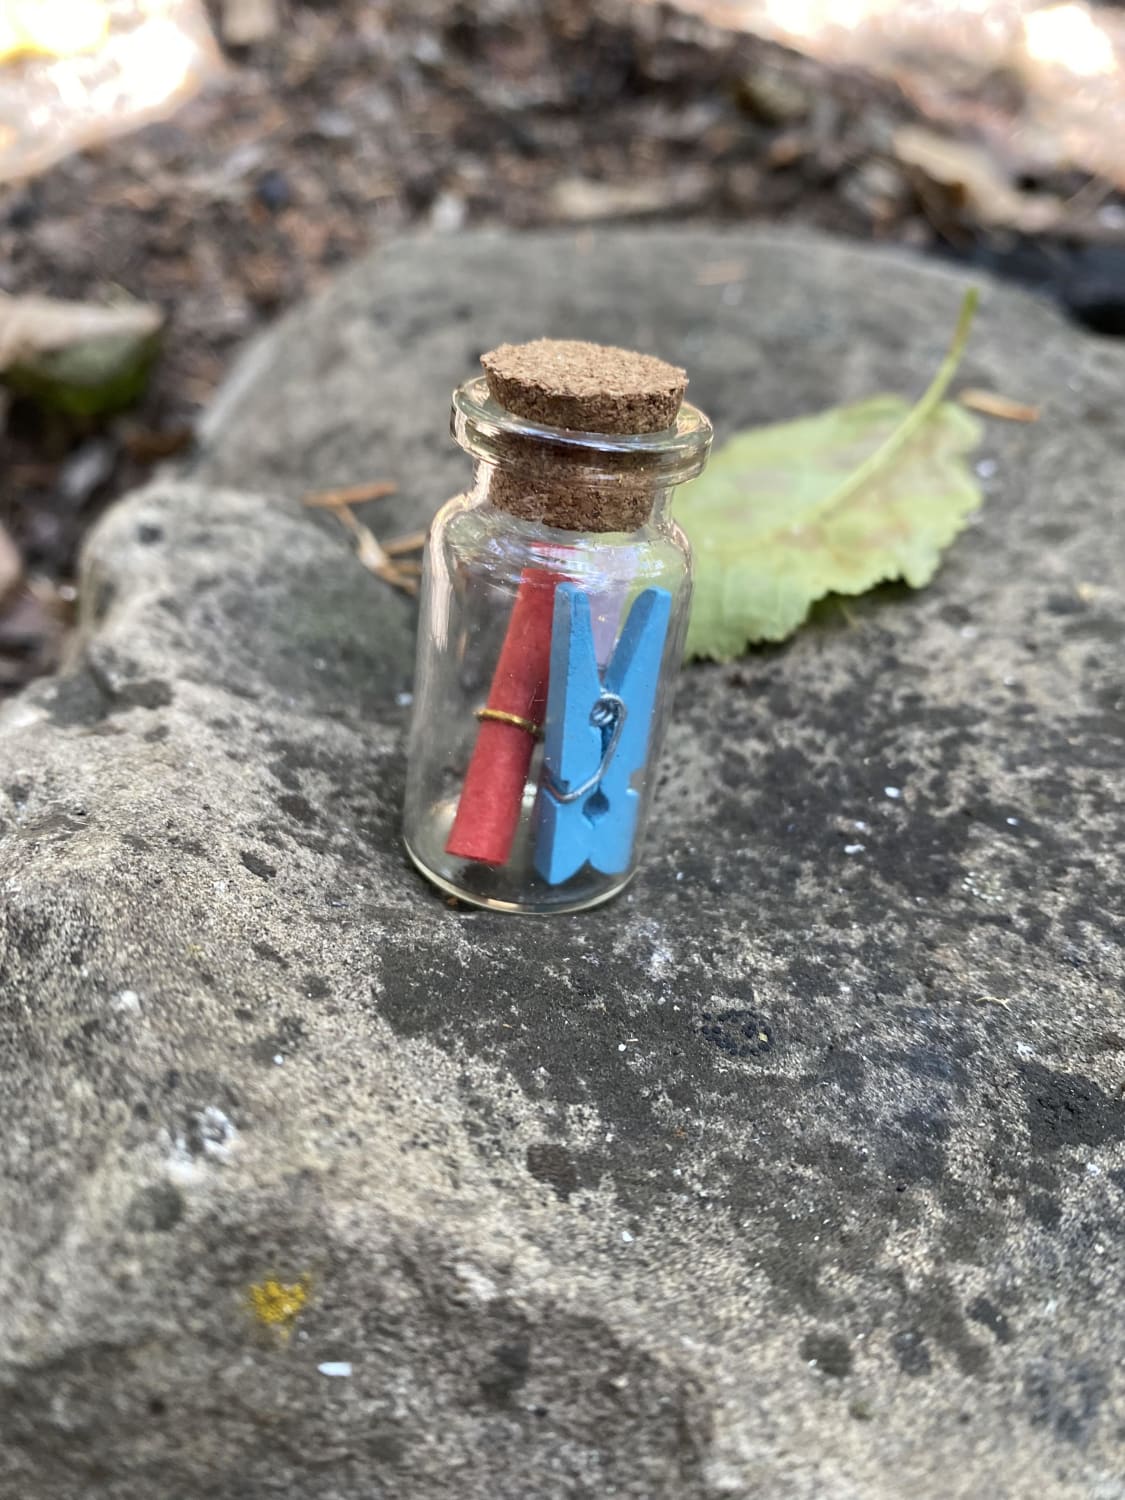 Found this little bottle with a small note and clip inside. It was about 10 kms in on a rough hike. Deliberately placed and left alone. Any ideas?